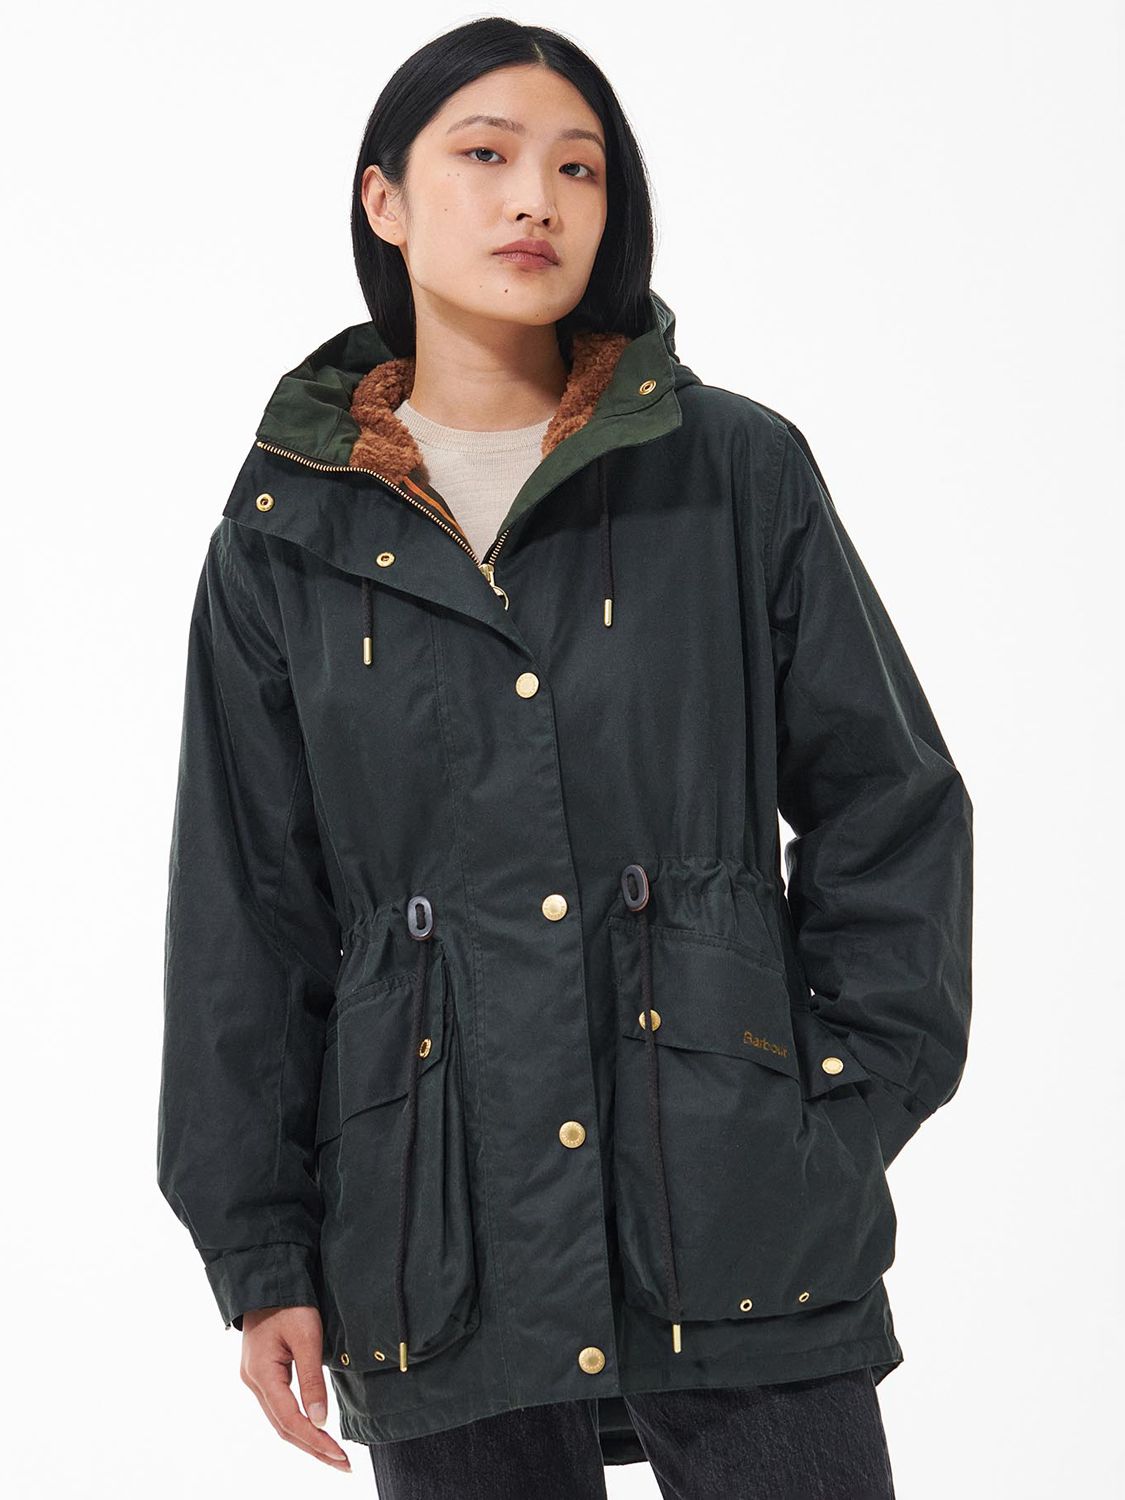 Barbour Grantley Waxed Parka Jacket, Sage/Classic at John Lewis & Partners